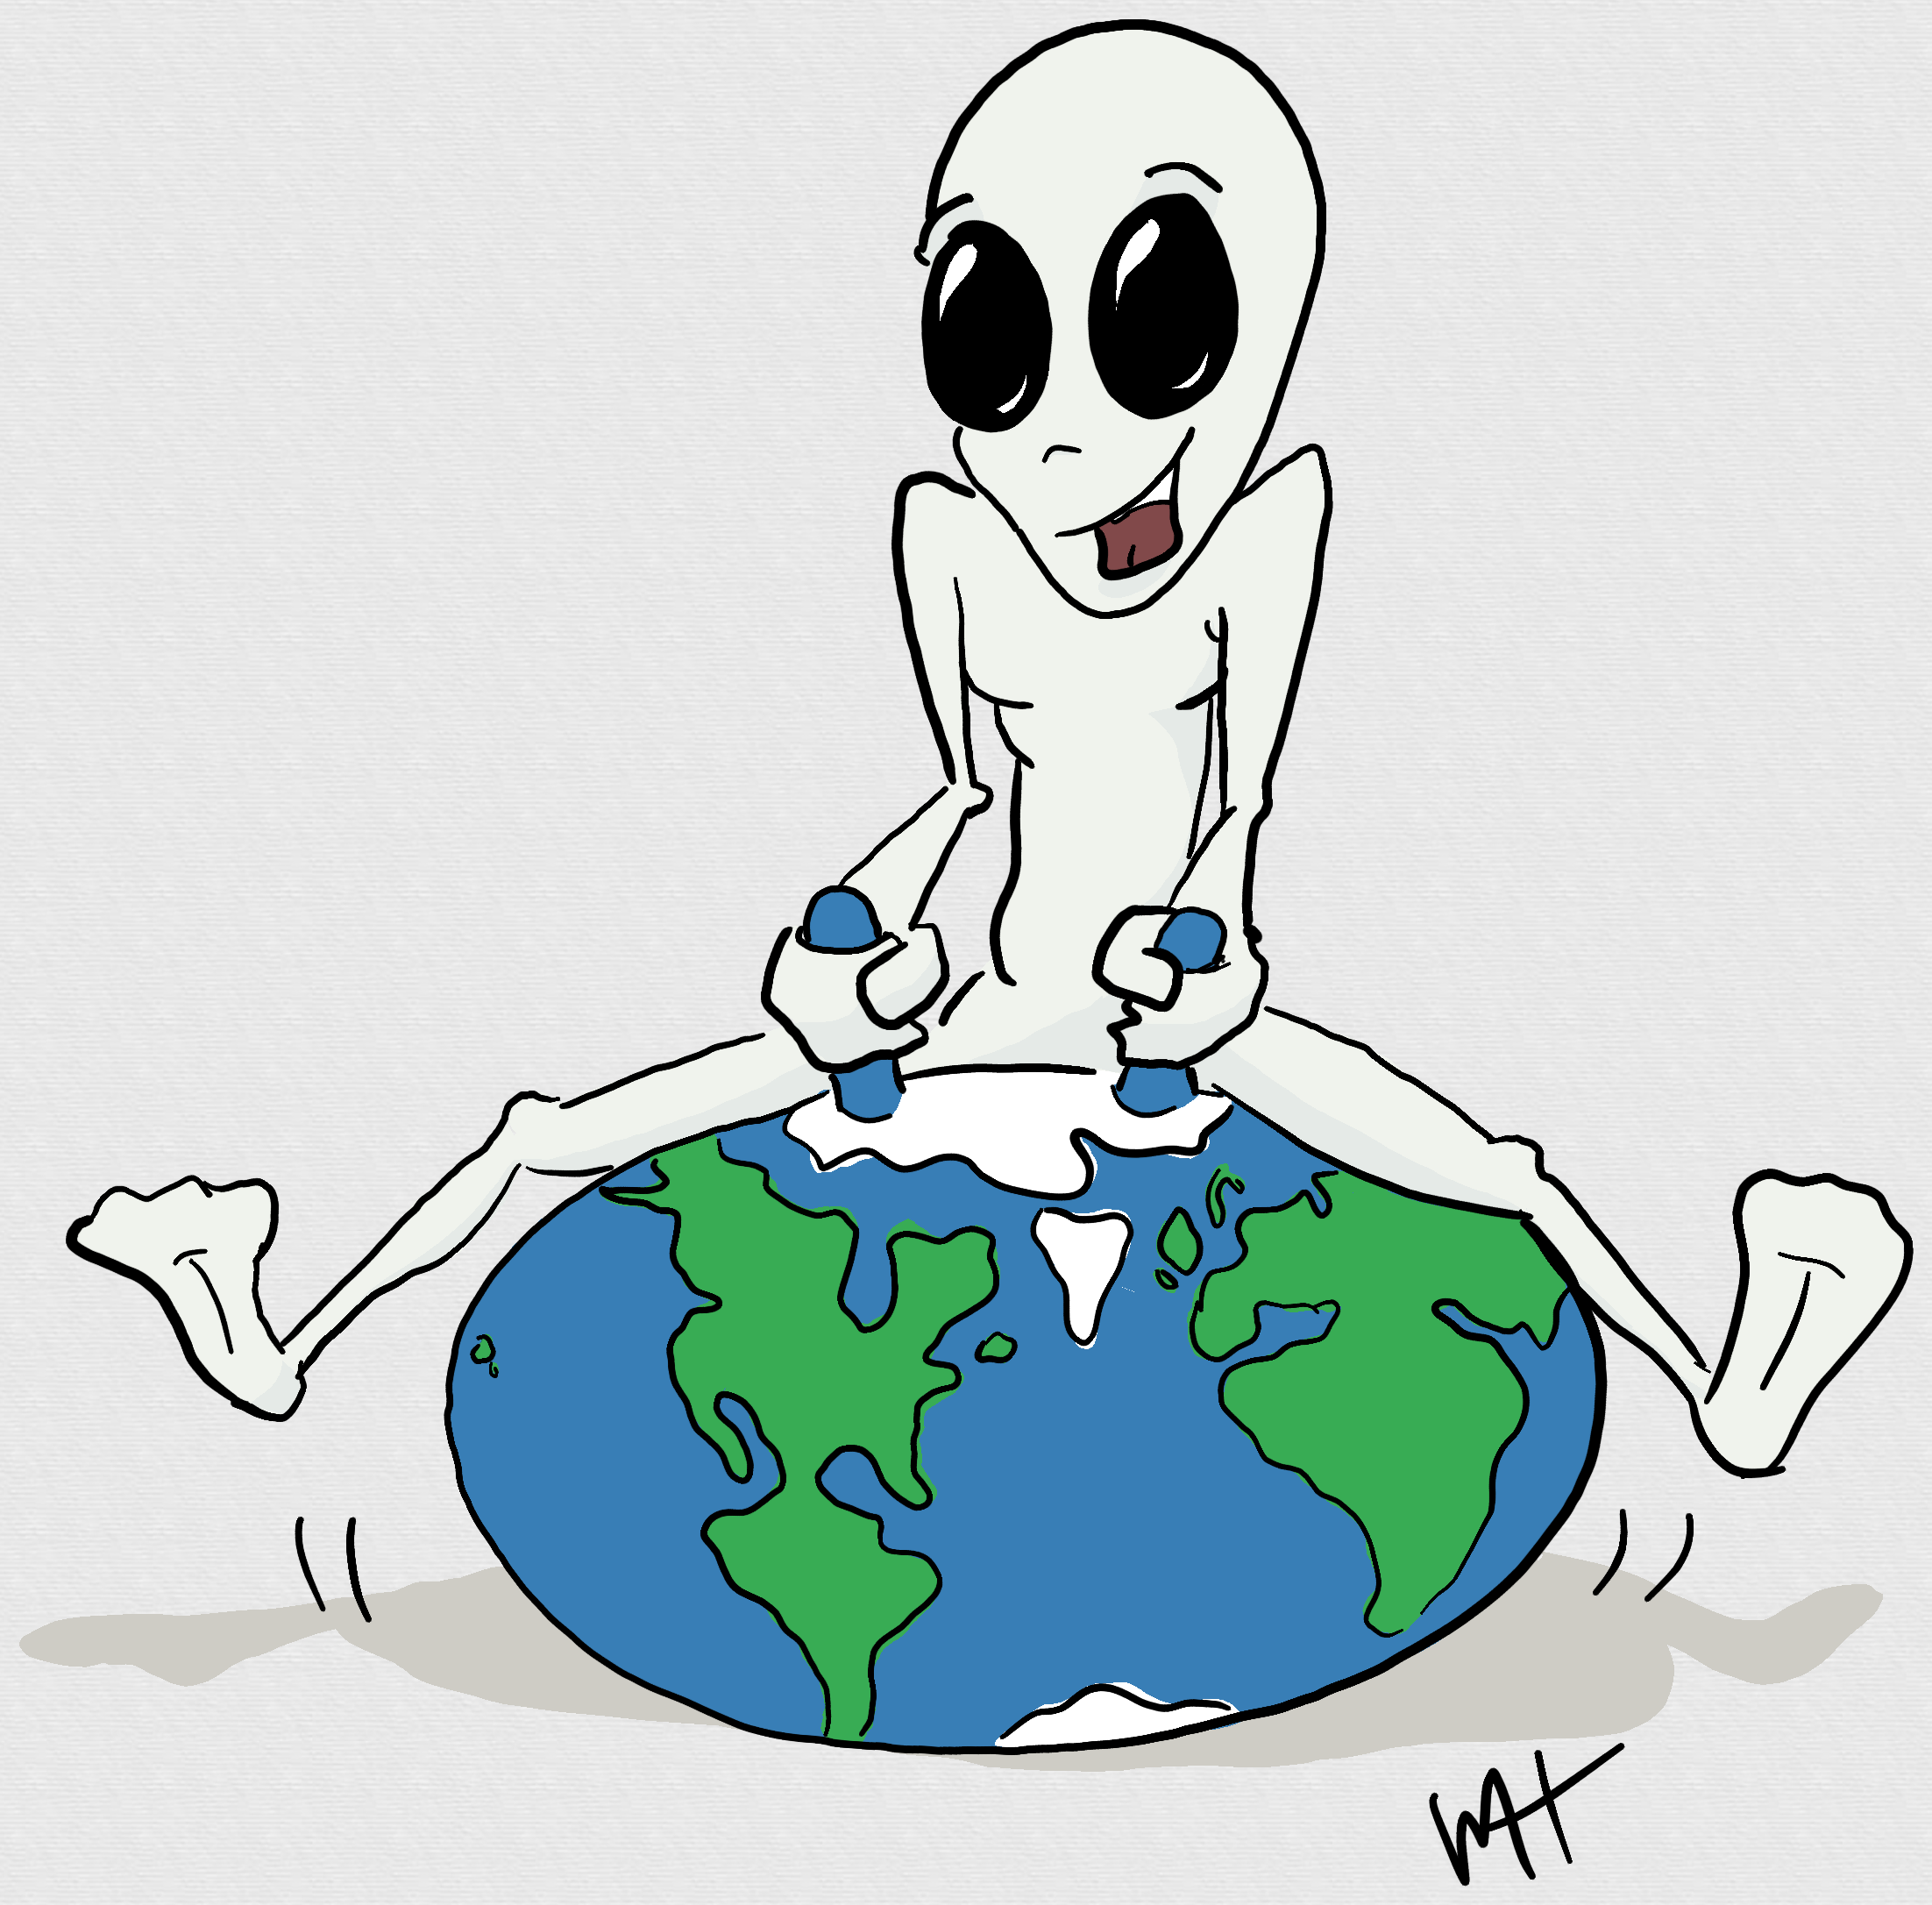 Inktober prompt "bounce." A drawing of a grey alien bouncing on a kid's bouncing toy the that is the Earth.